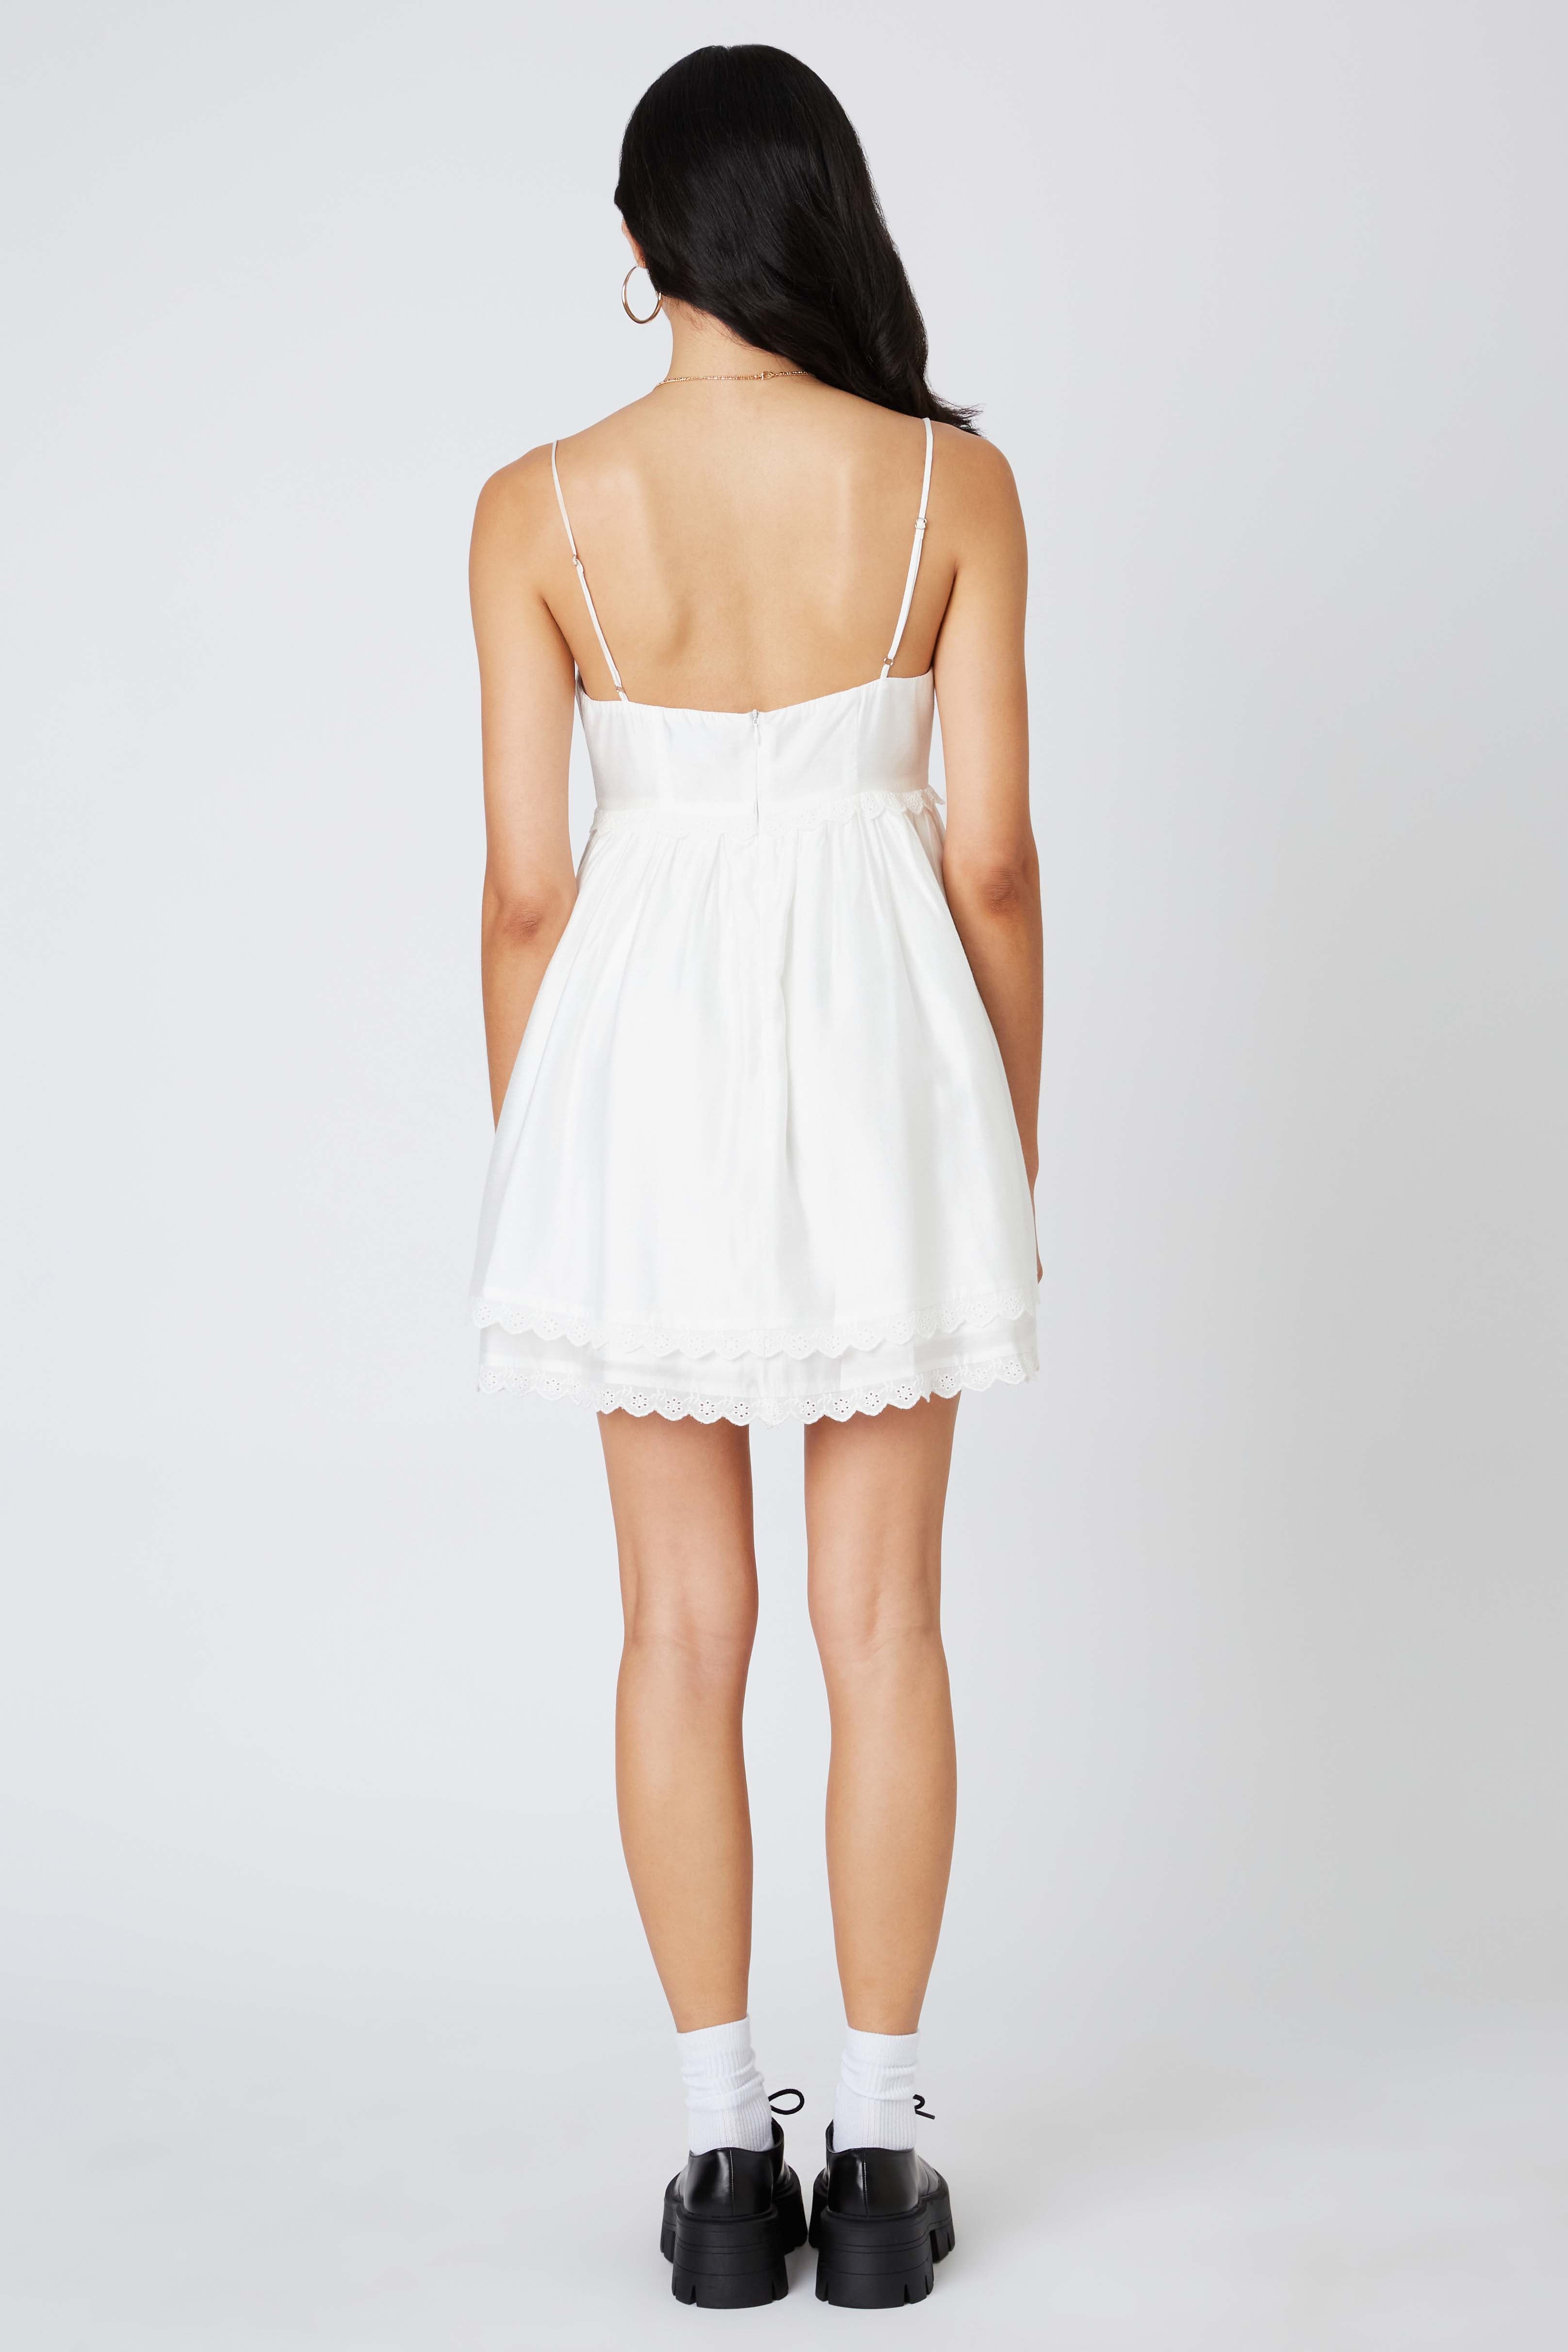 Corset Babydoll Dress in White Back View